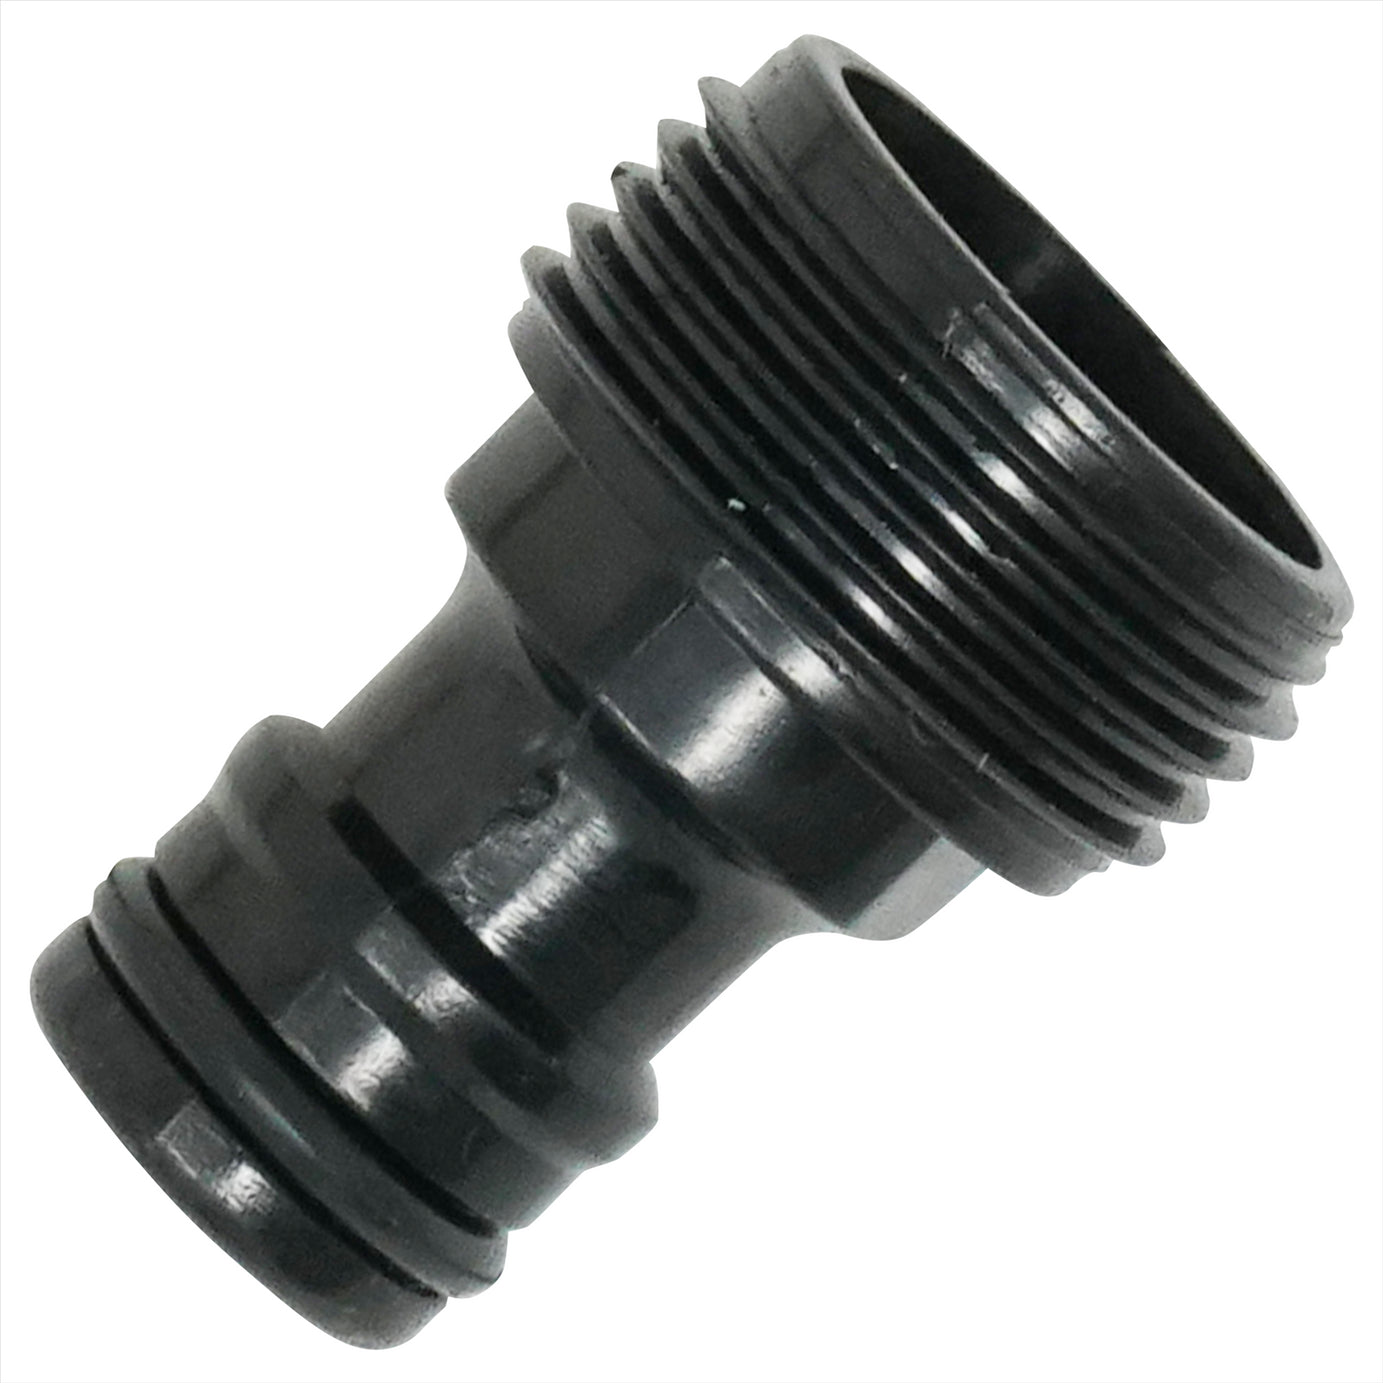 Garden Water Tap Hose Pipe Connector 